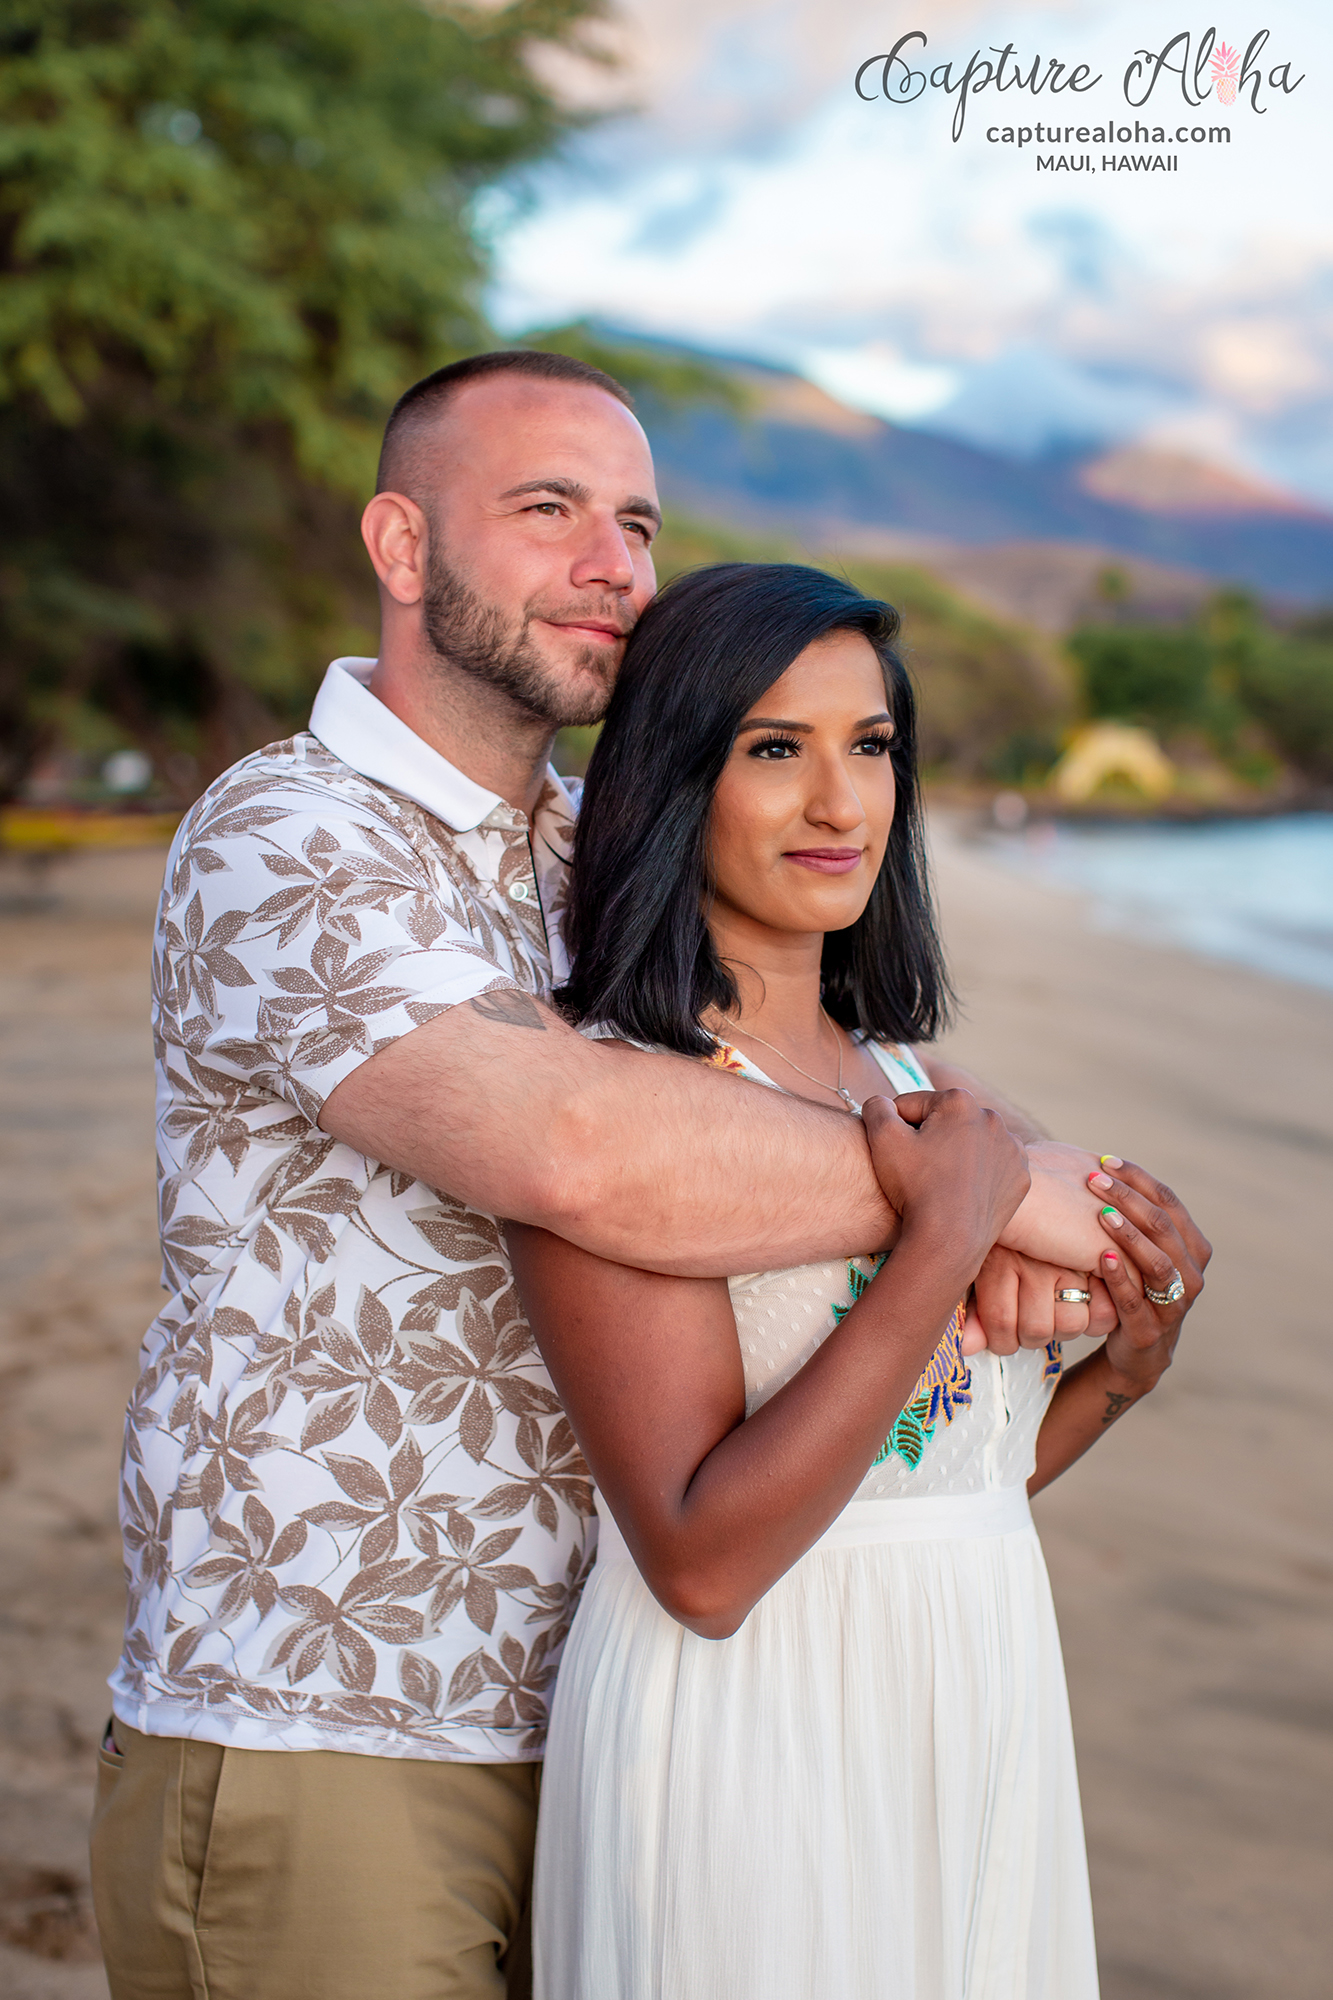 Close up picture of a couple on a beach in Maui during sunset